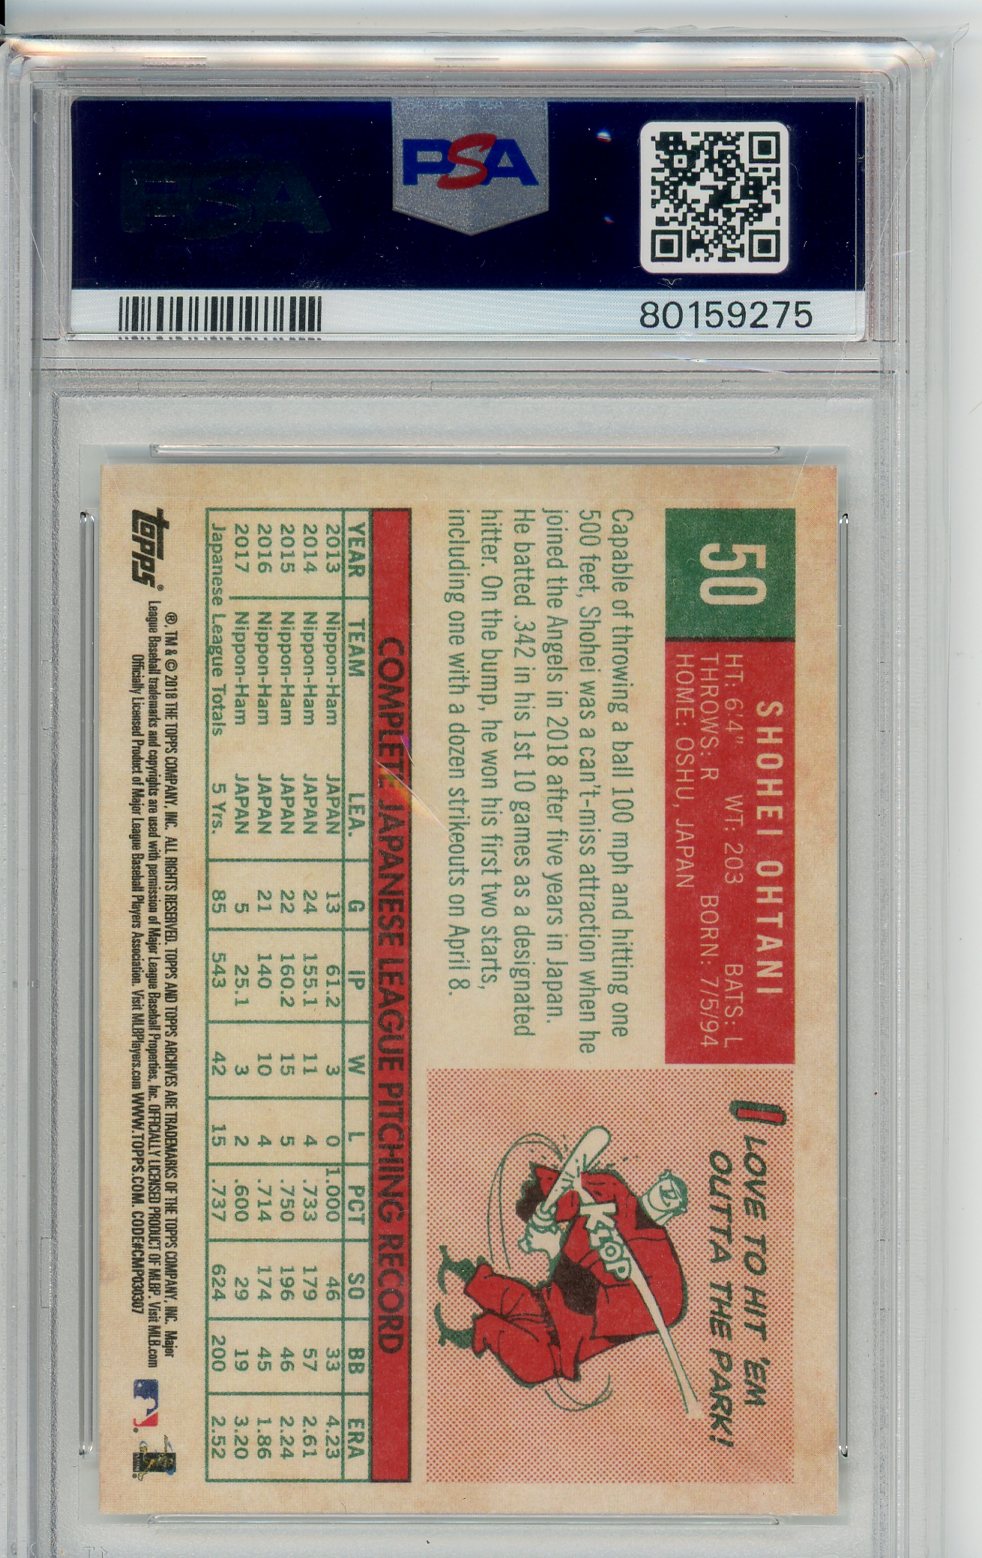 2018 Topps Archives Shohei Ohtani Pitching Stance Card PSA 9